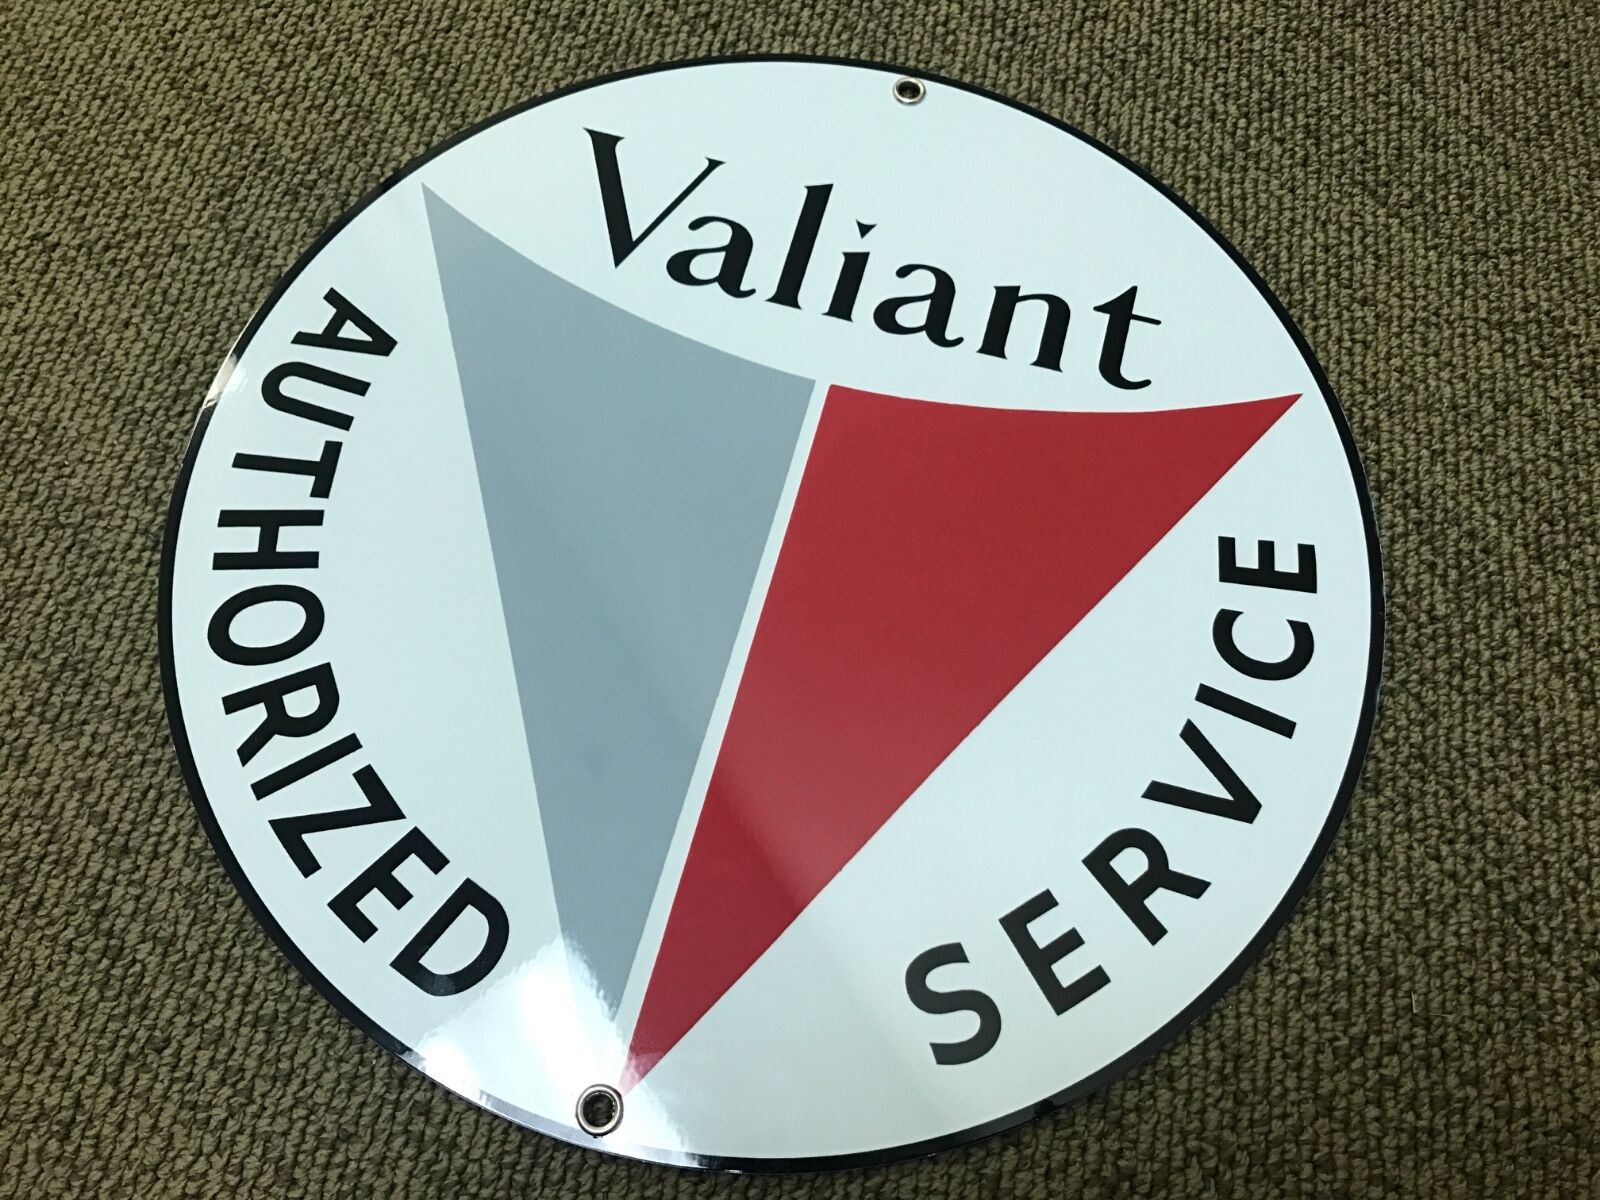 Valiant service vintage Plymouth Chrysler round sign reproduction grey